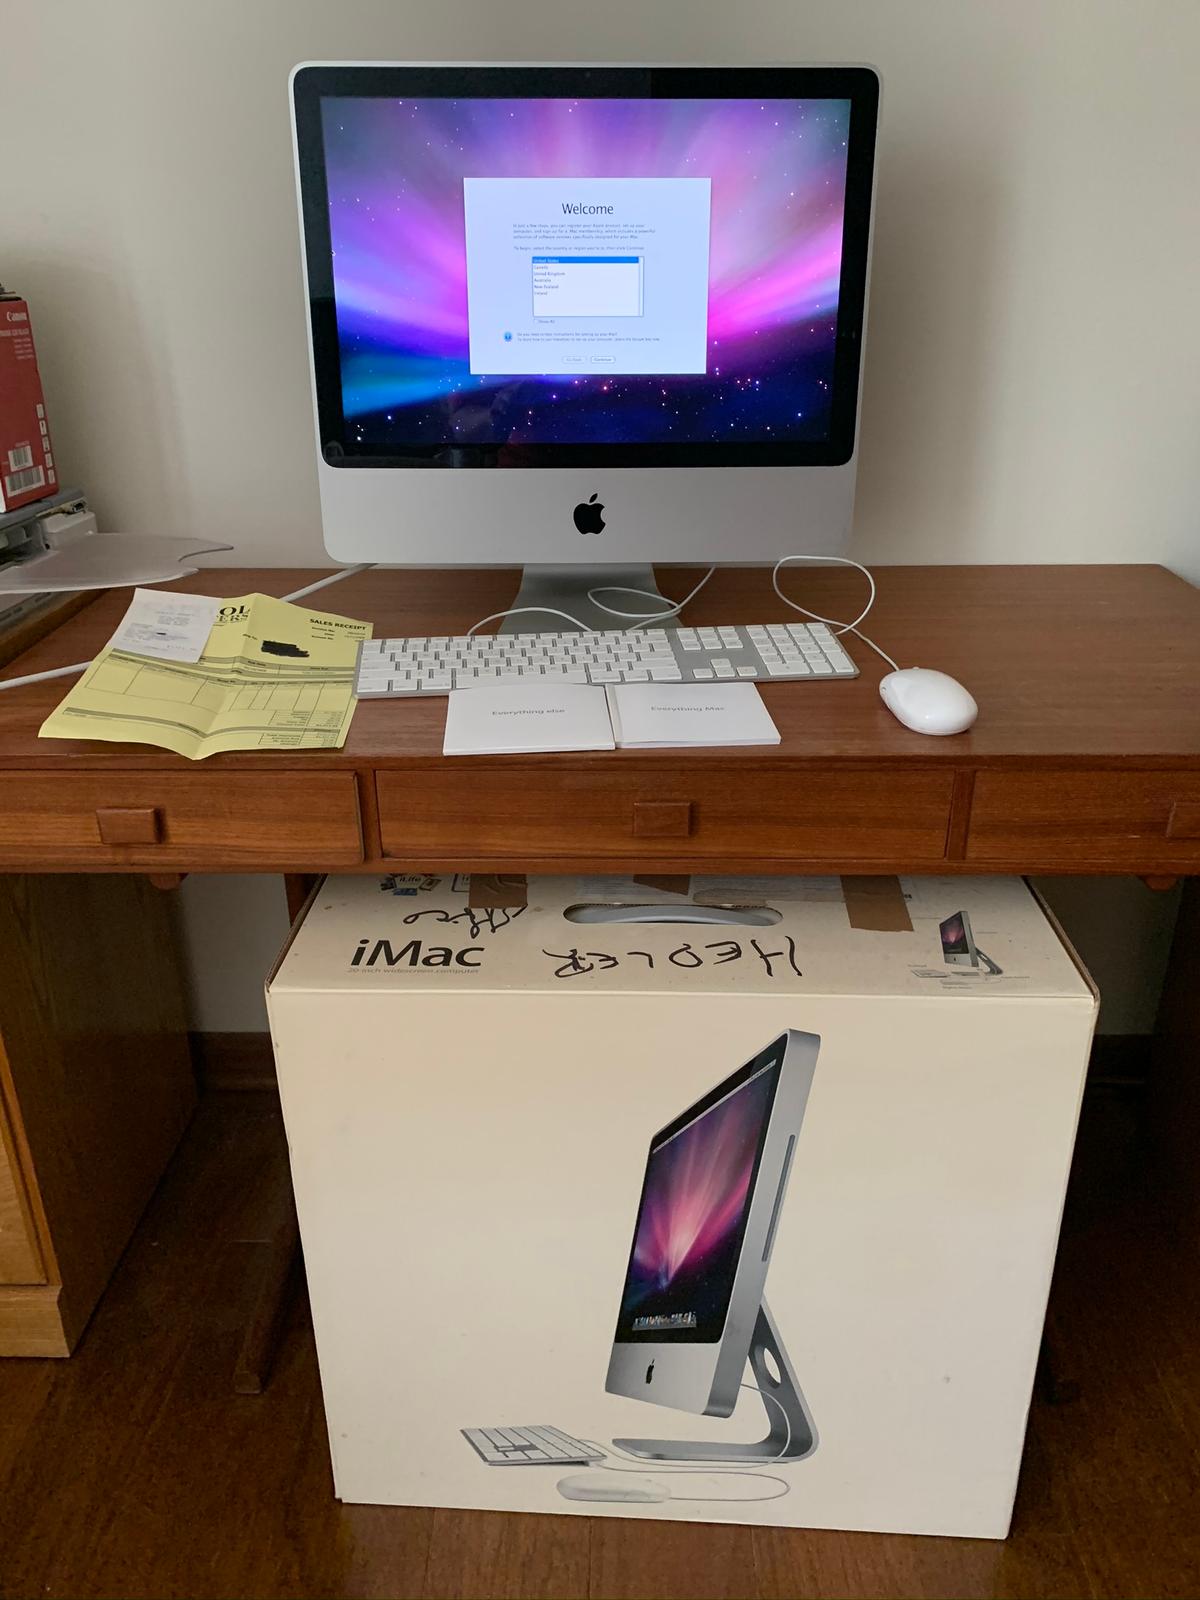 Apple Imac 20 inch computer with keyboard and mouse